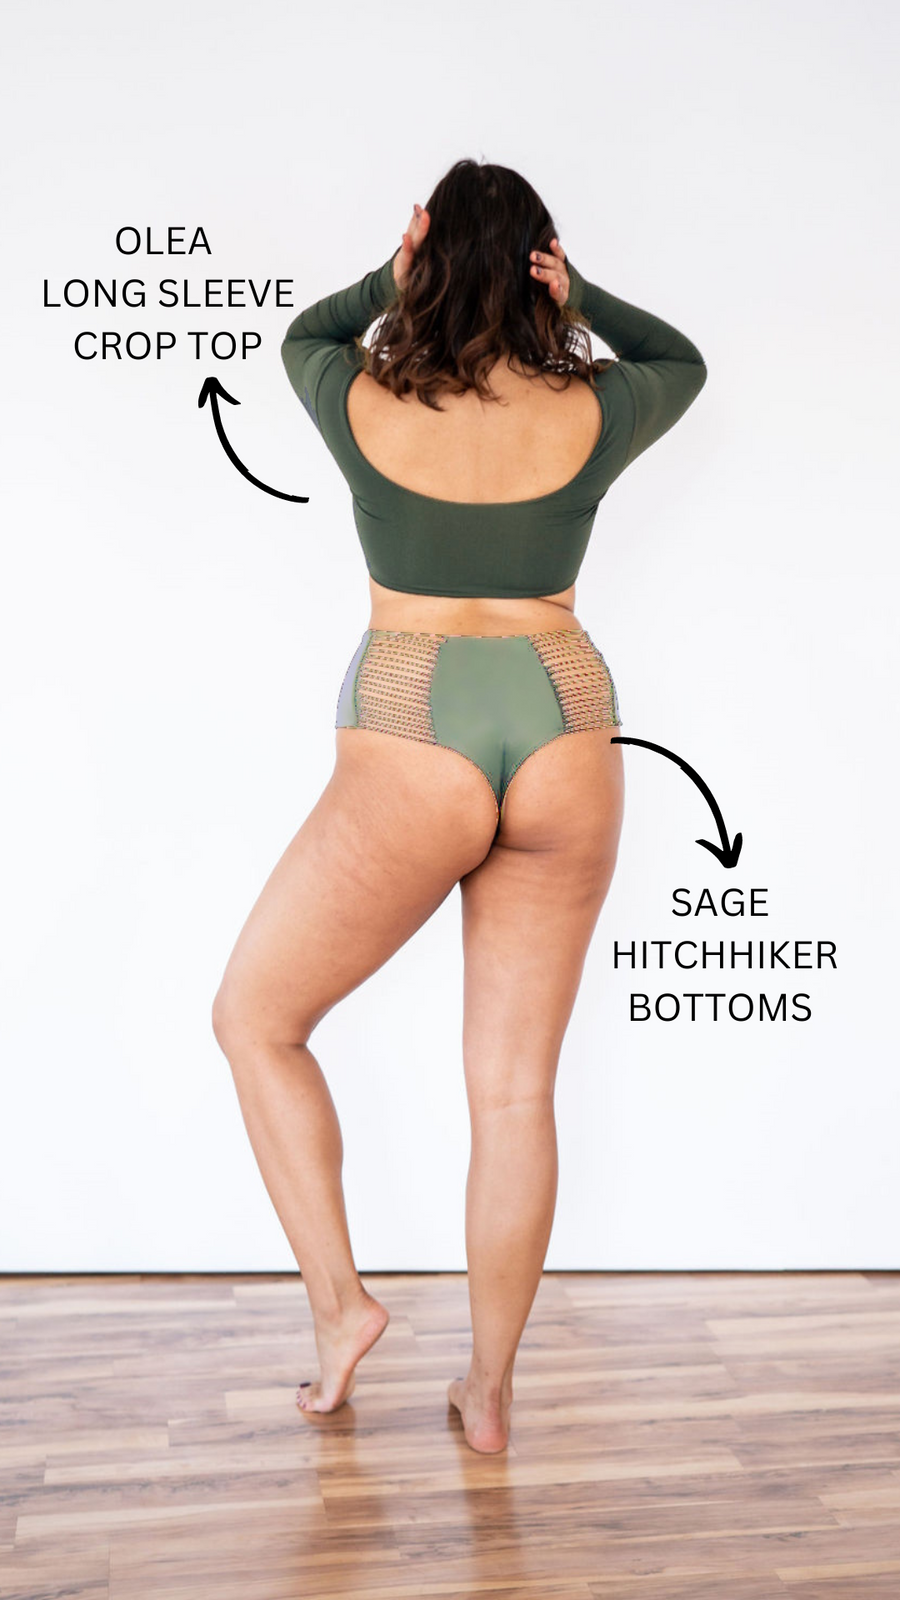 How to Make Your Saggy Bikini Bottoms Fit Like You Have a Bubble